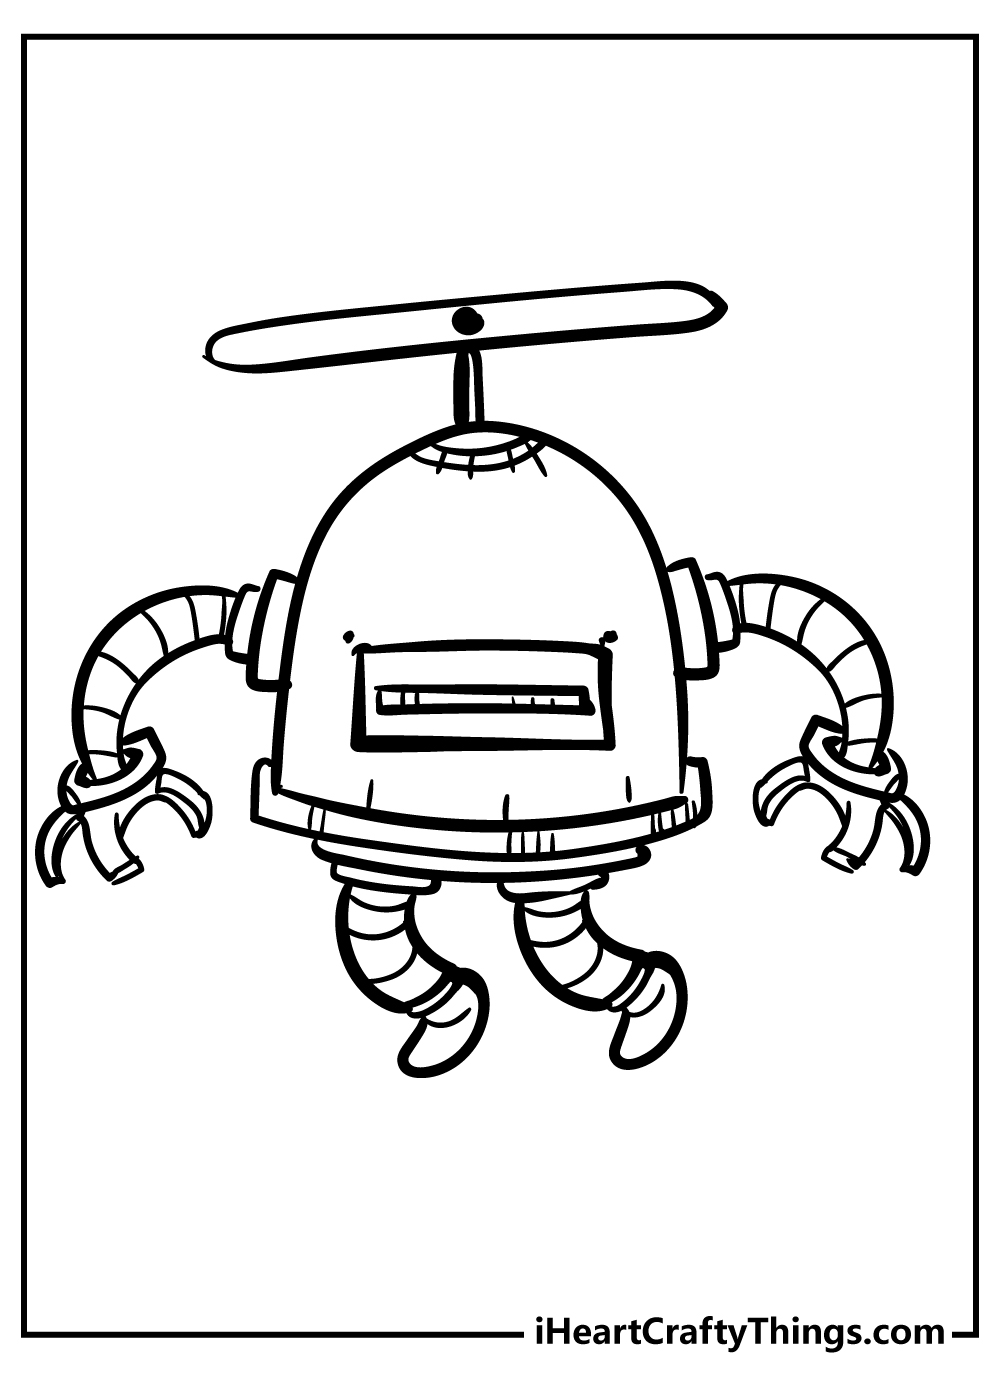 Robot coloring pages free printable